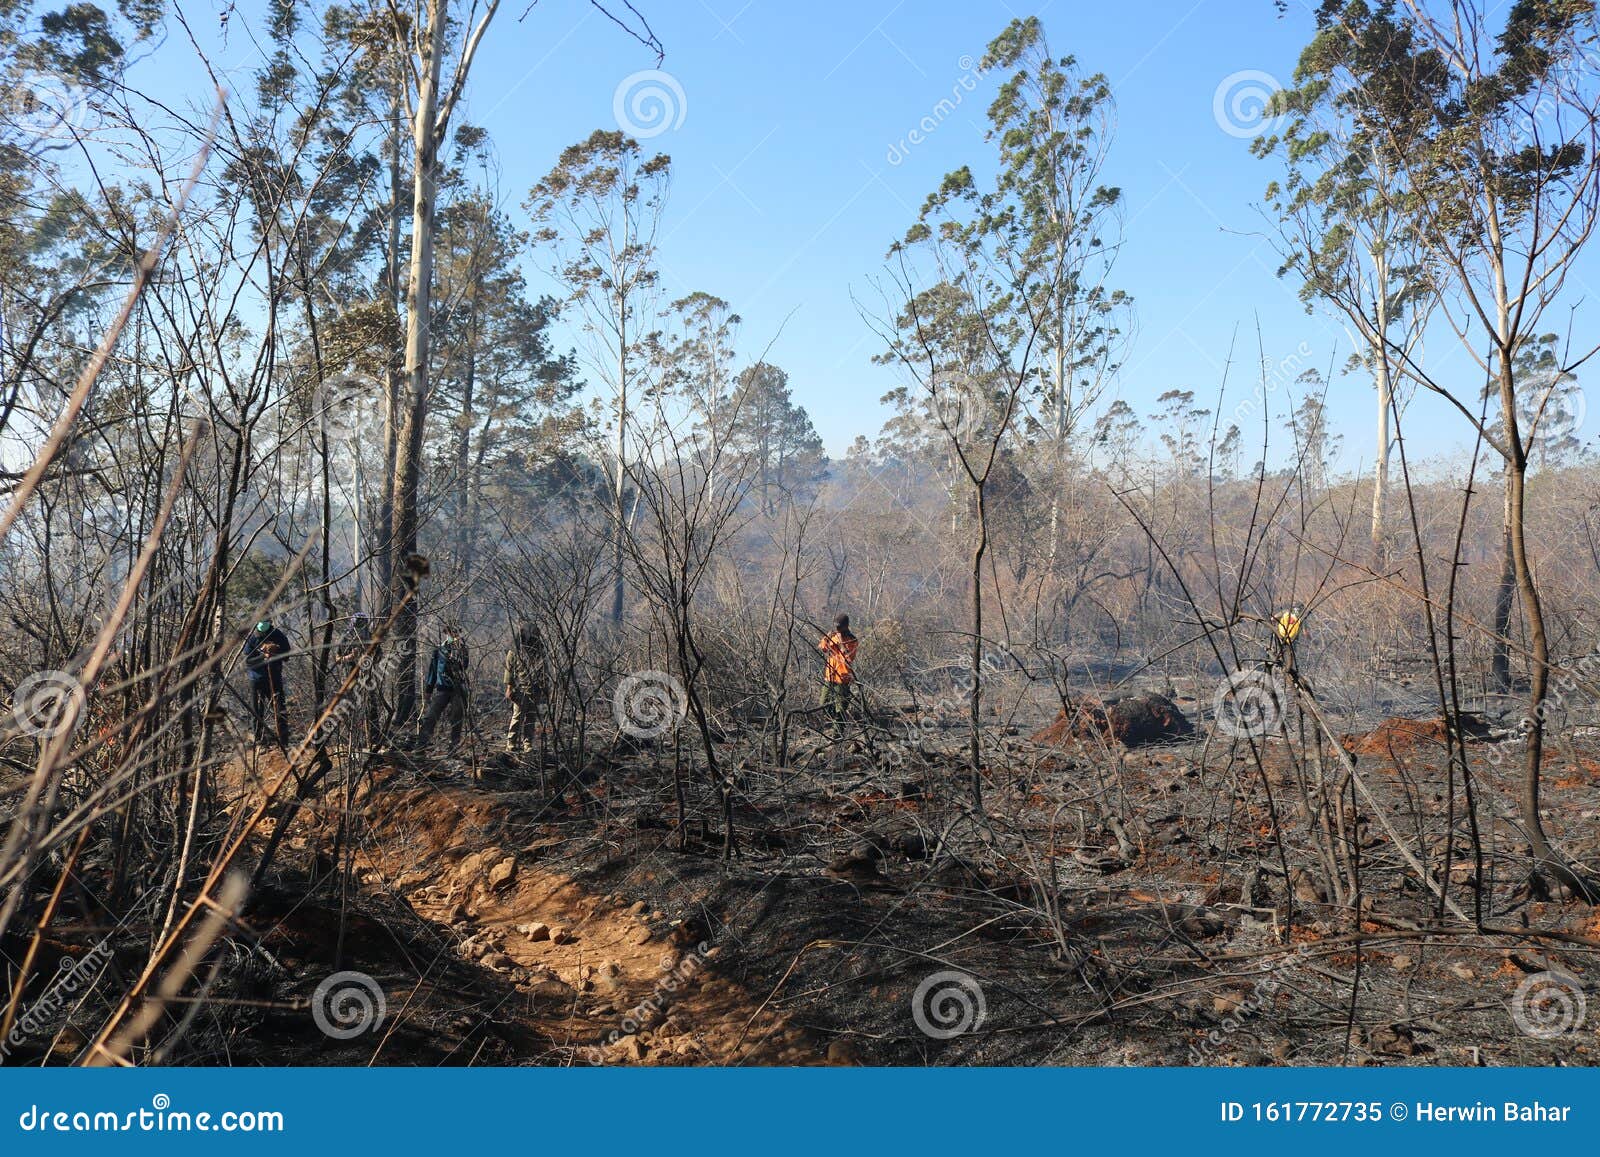 Forest Fires That Occurred On Mount Bawakaraeng South Sulawesi Indonesia Editorial Image Image Of Bawakaraeng Environment 161772735